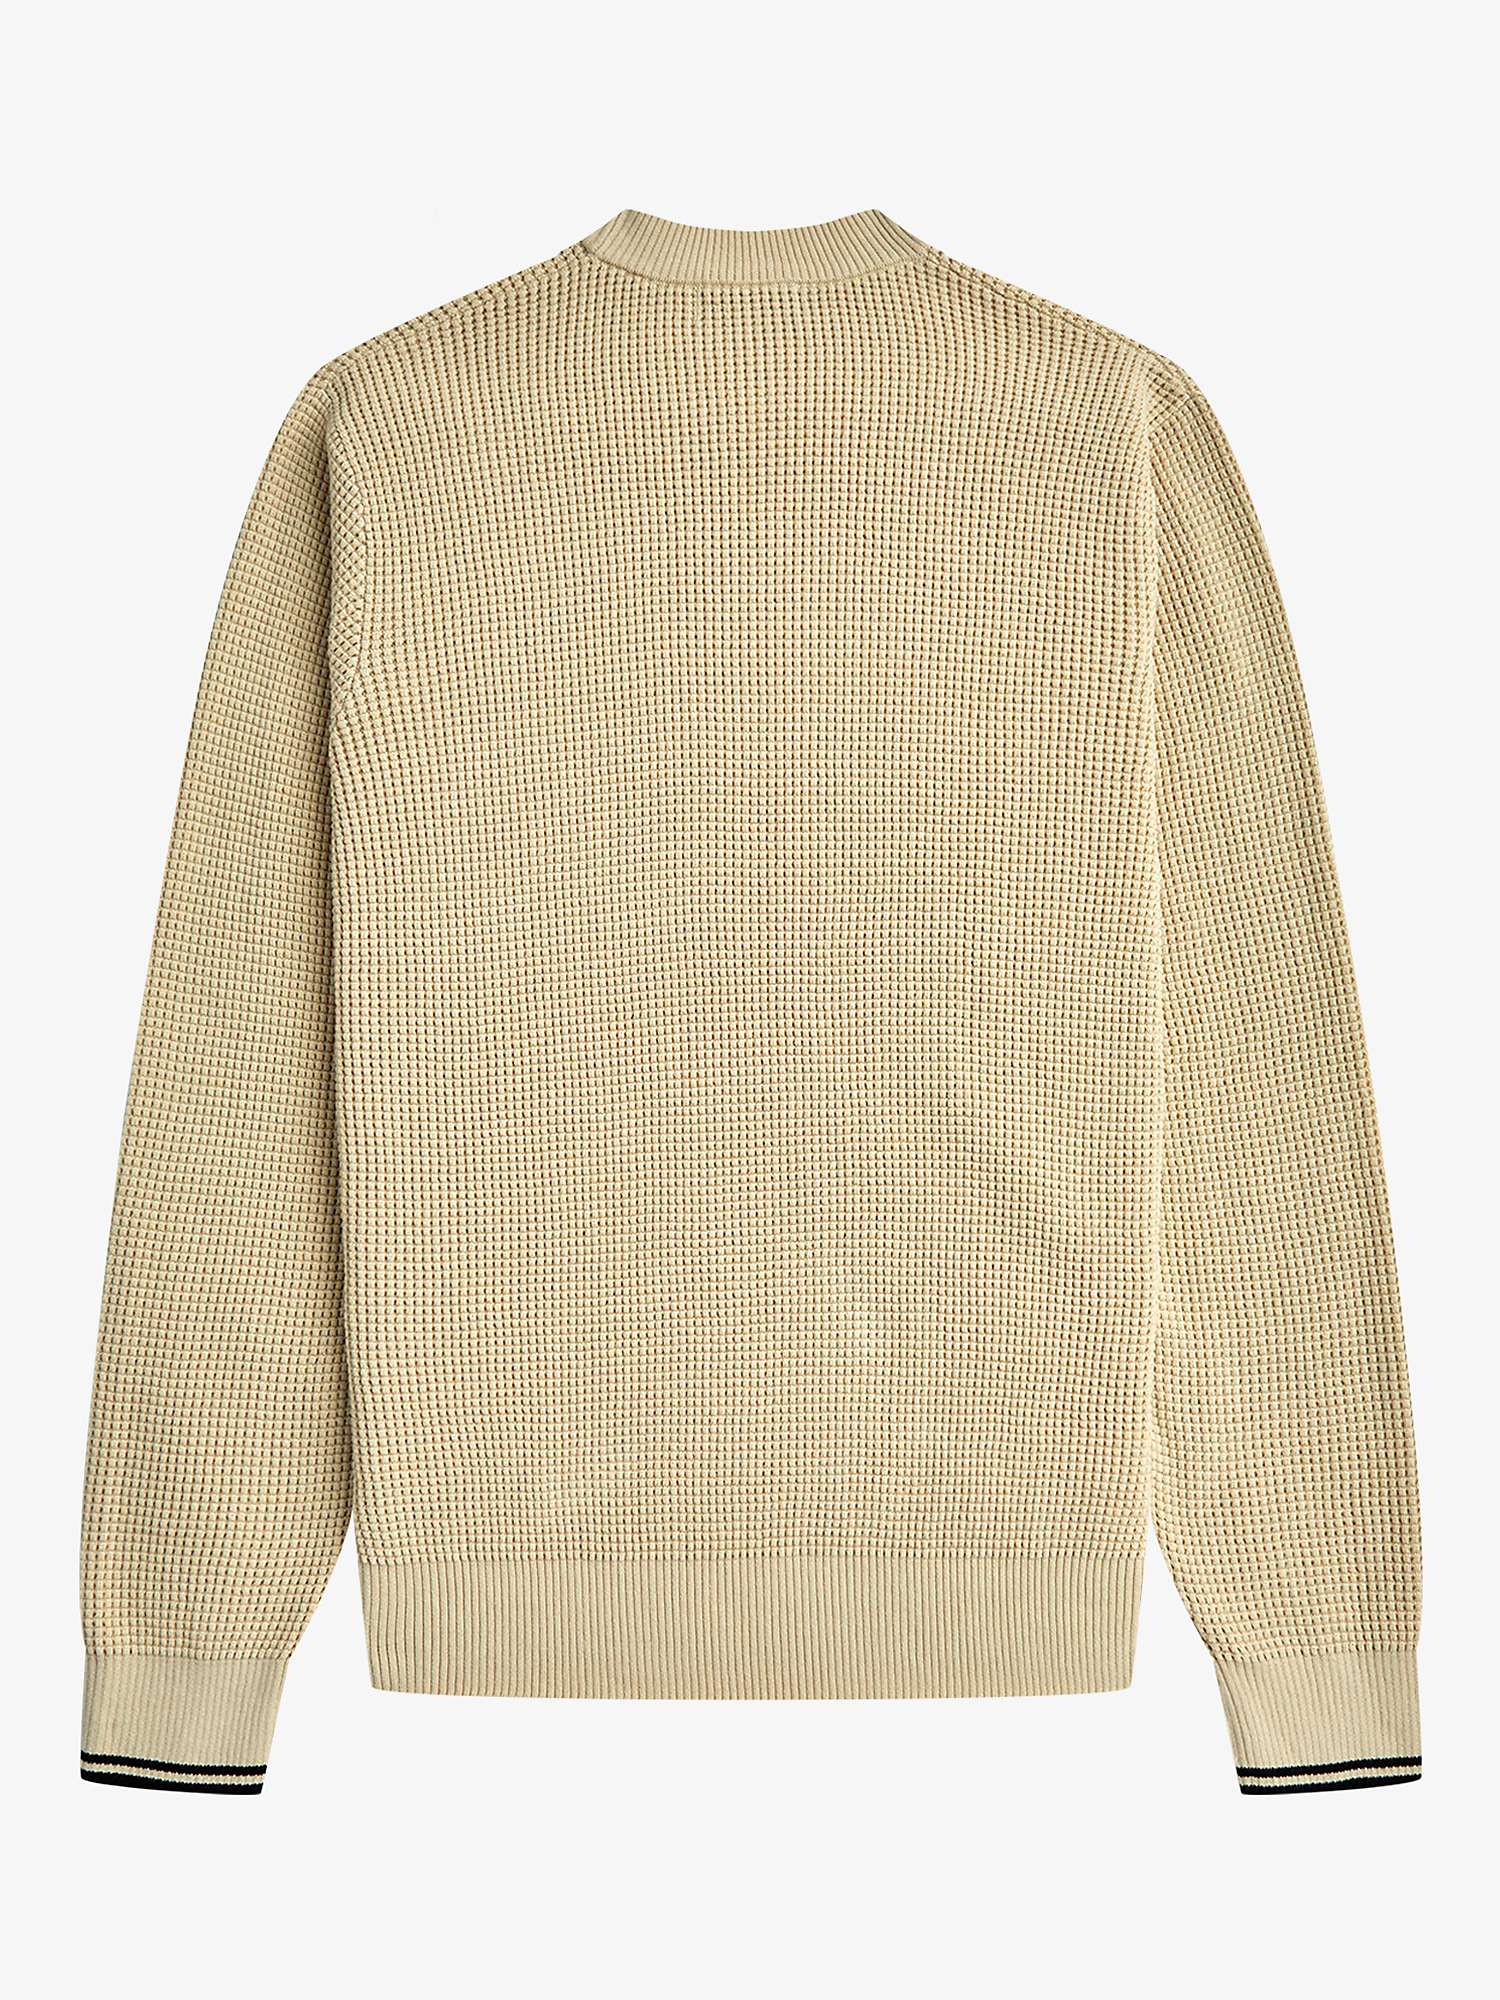 Fred Perry Waffle Stitch Knit Jumper, Oatmeal at John Lewis & Partners